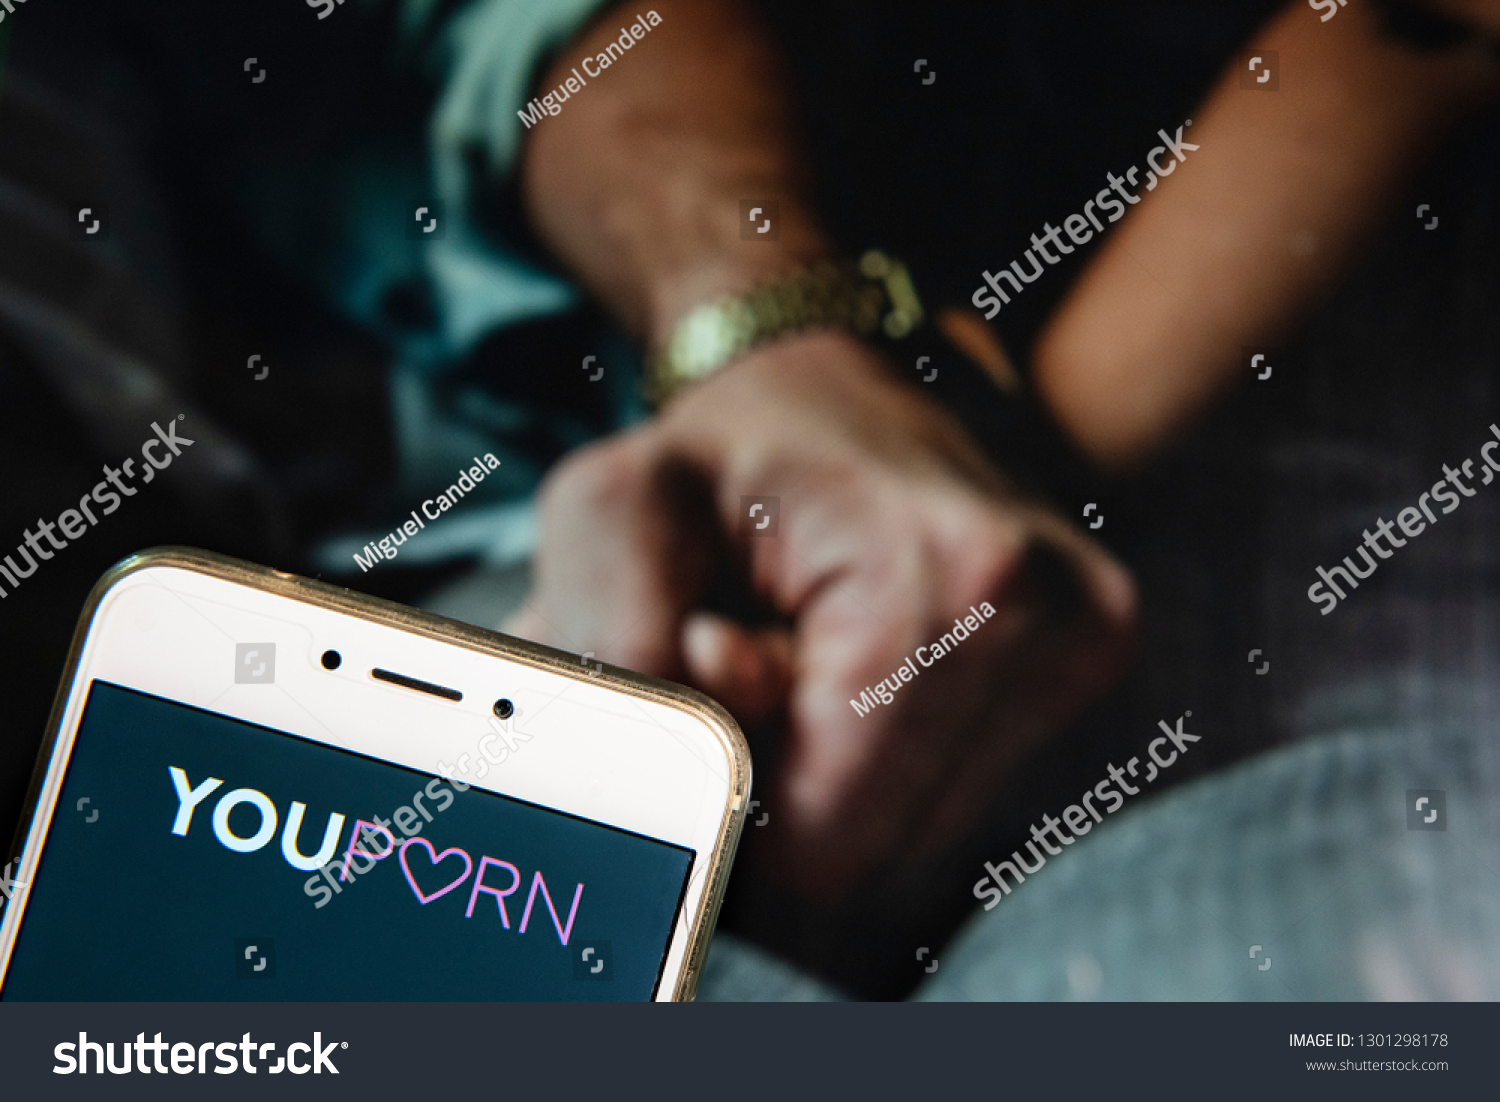 Youporn Mob